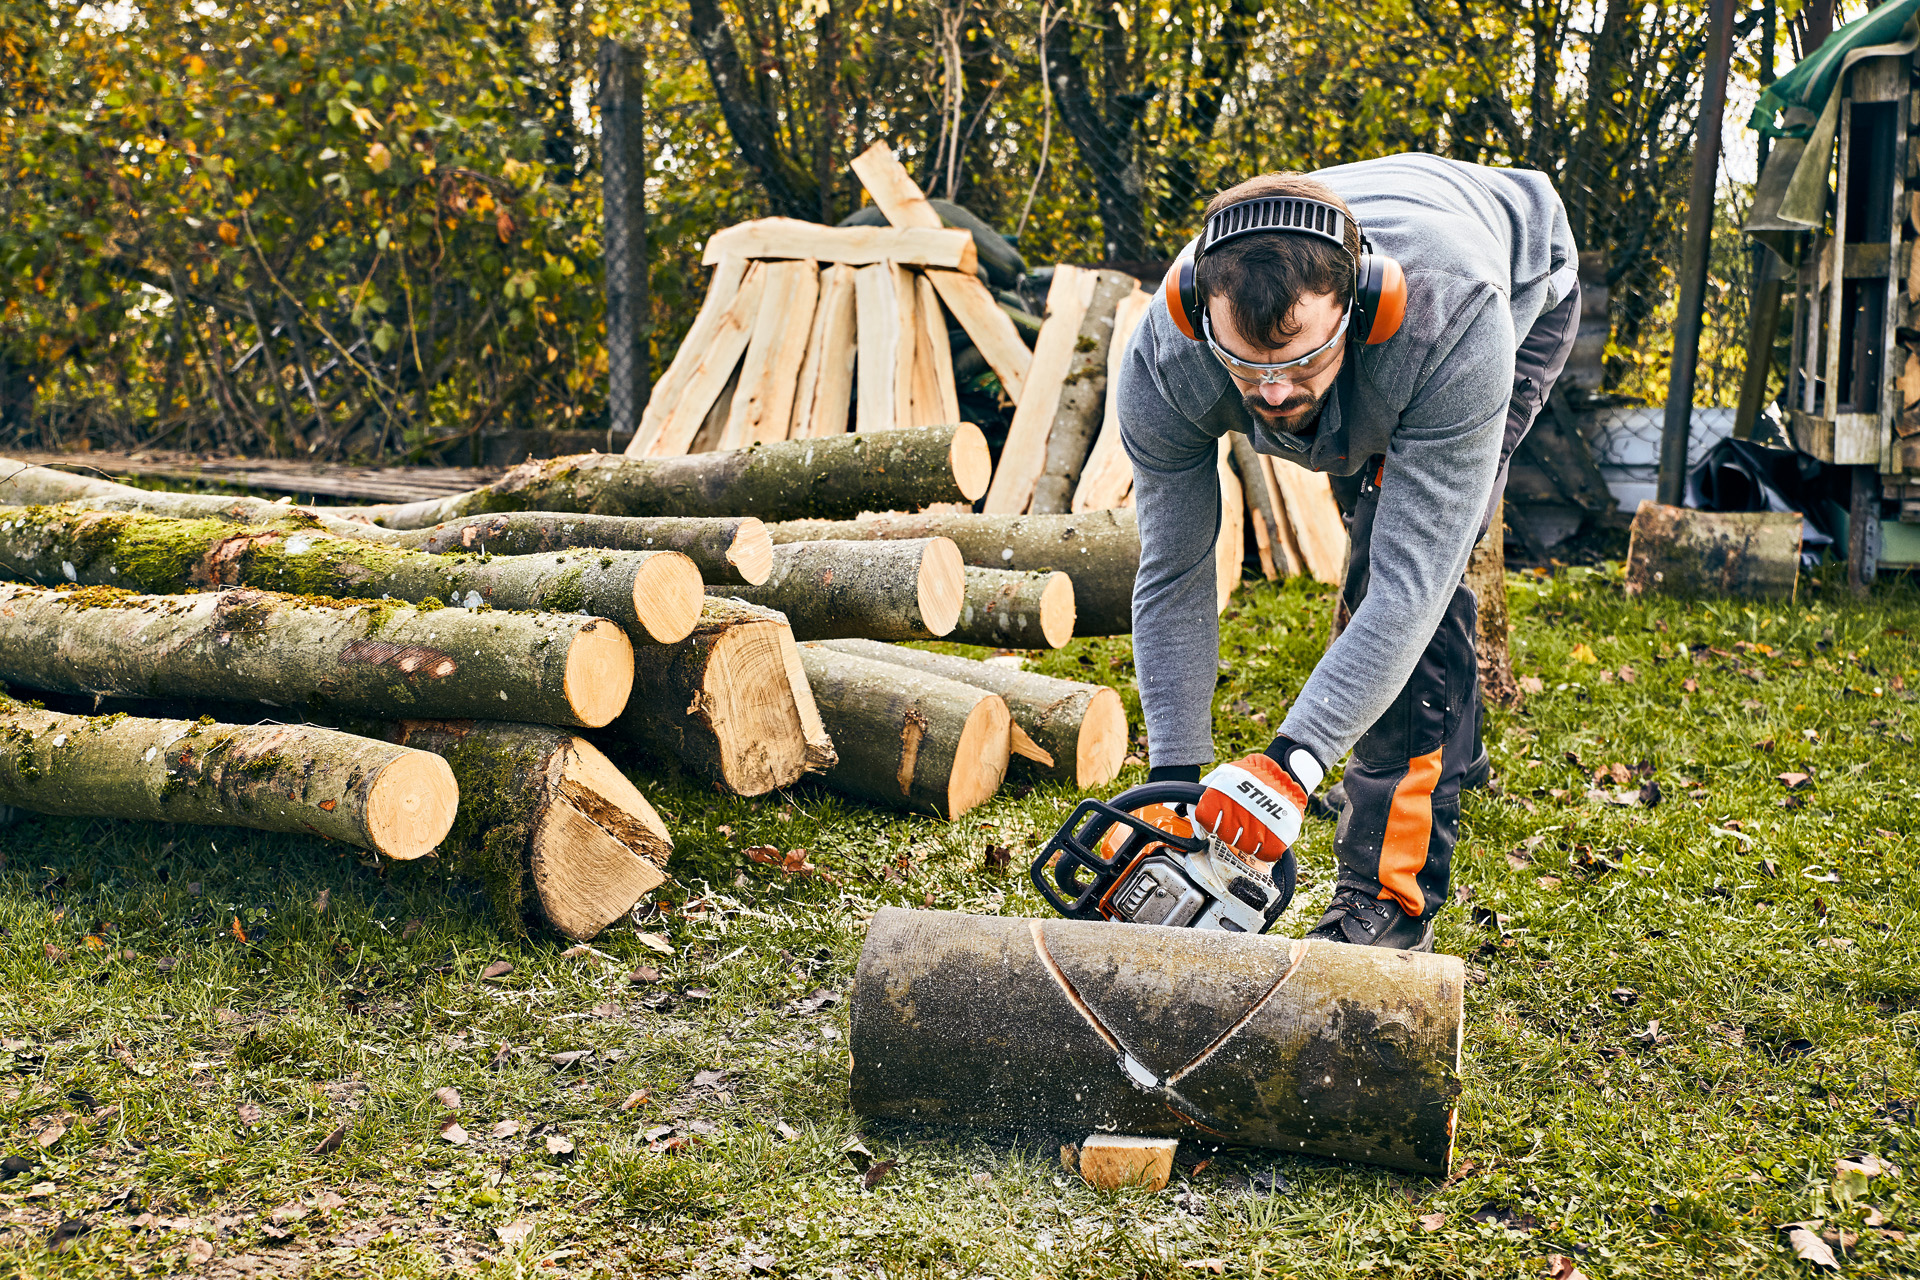 A man wearing ear protection using a STIHL MS 180 chainsaw is working on a DIY garden bench